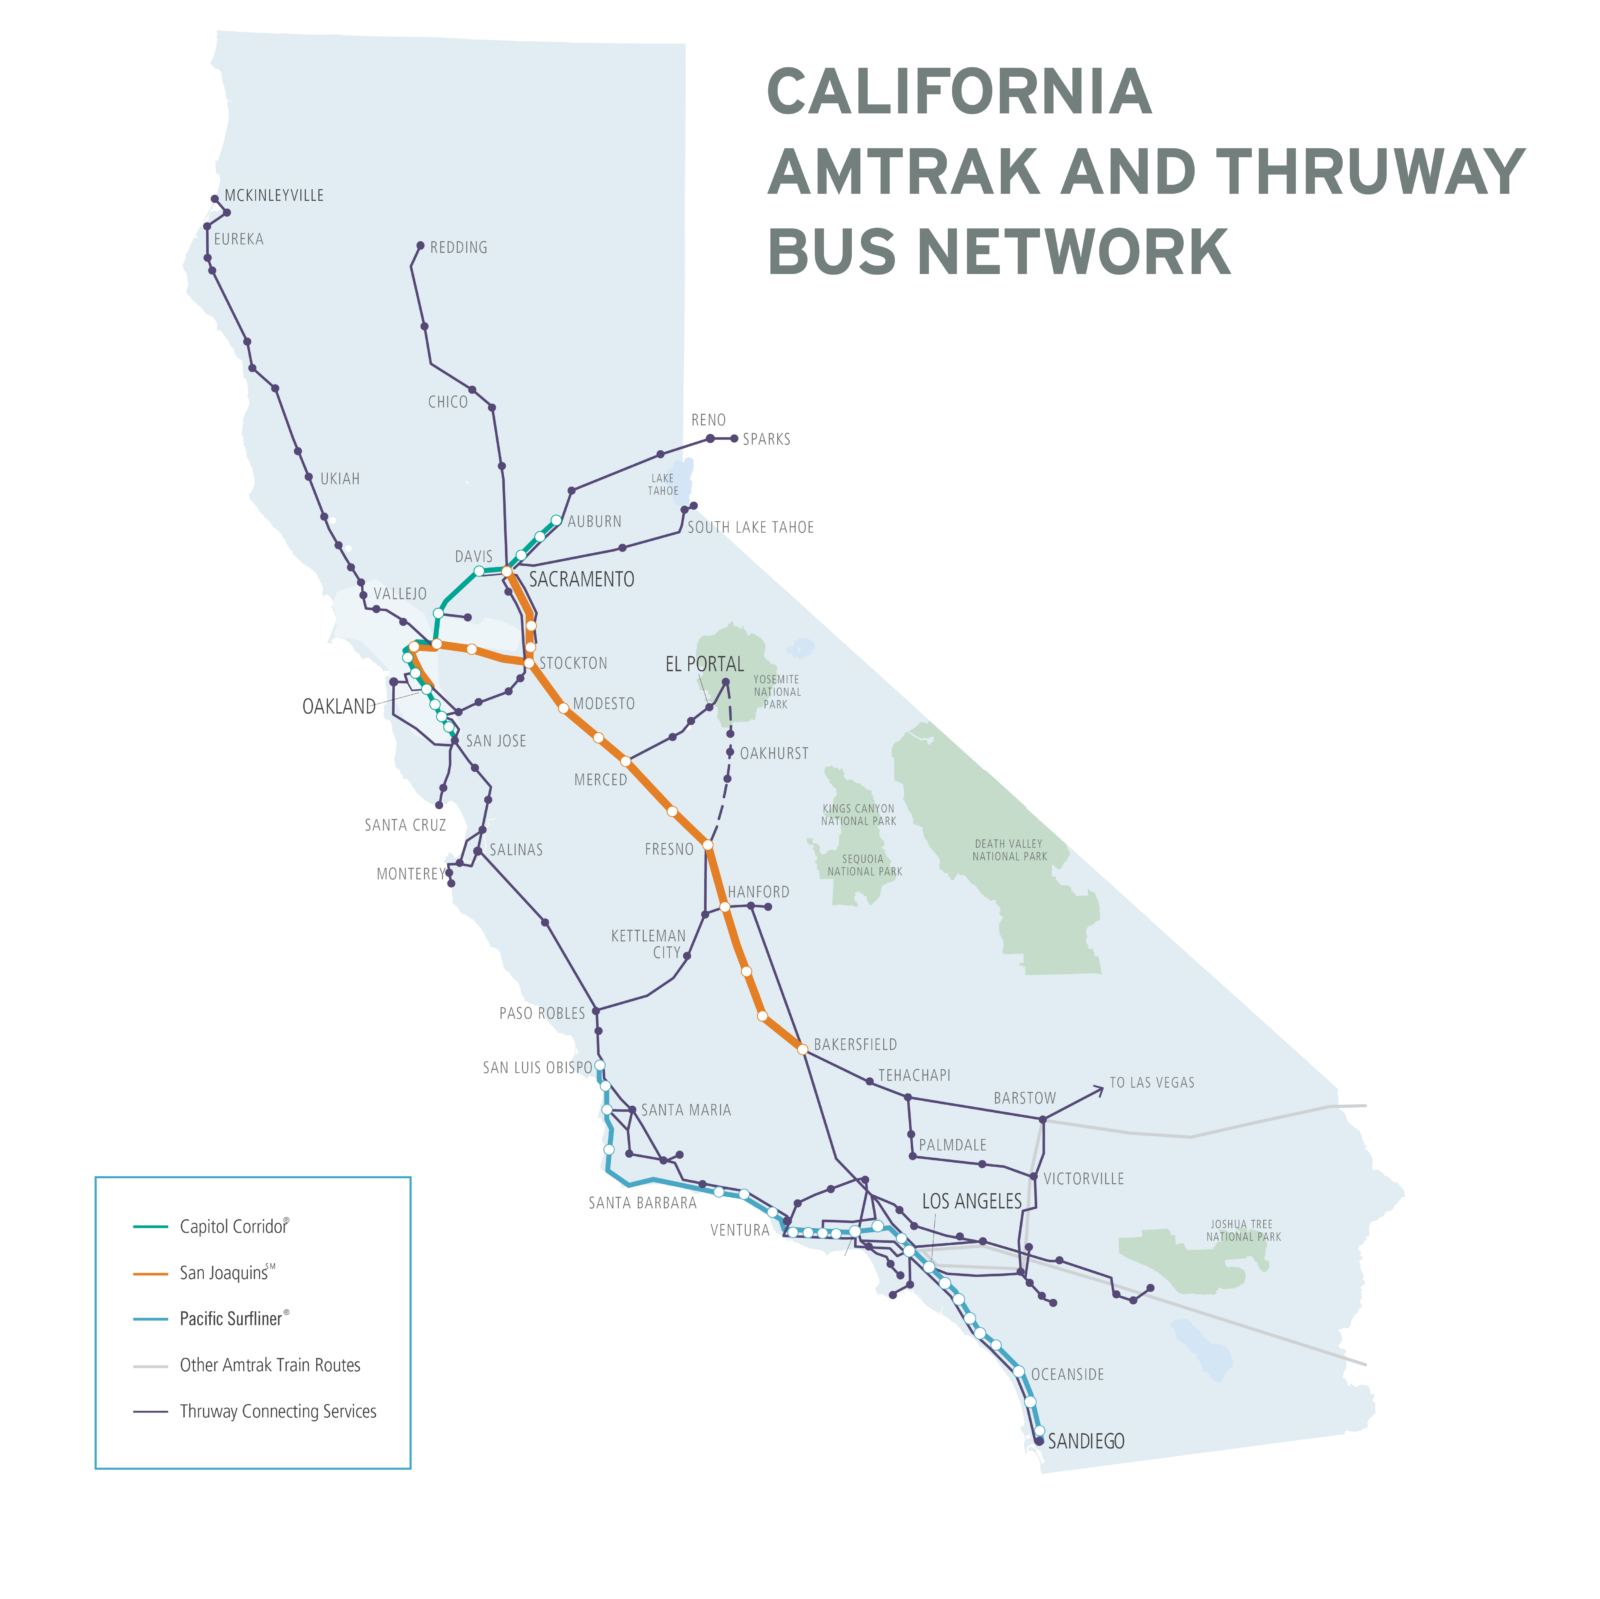 A map of the extensive Amtrak and Thruway bus network linking most of California.